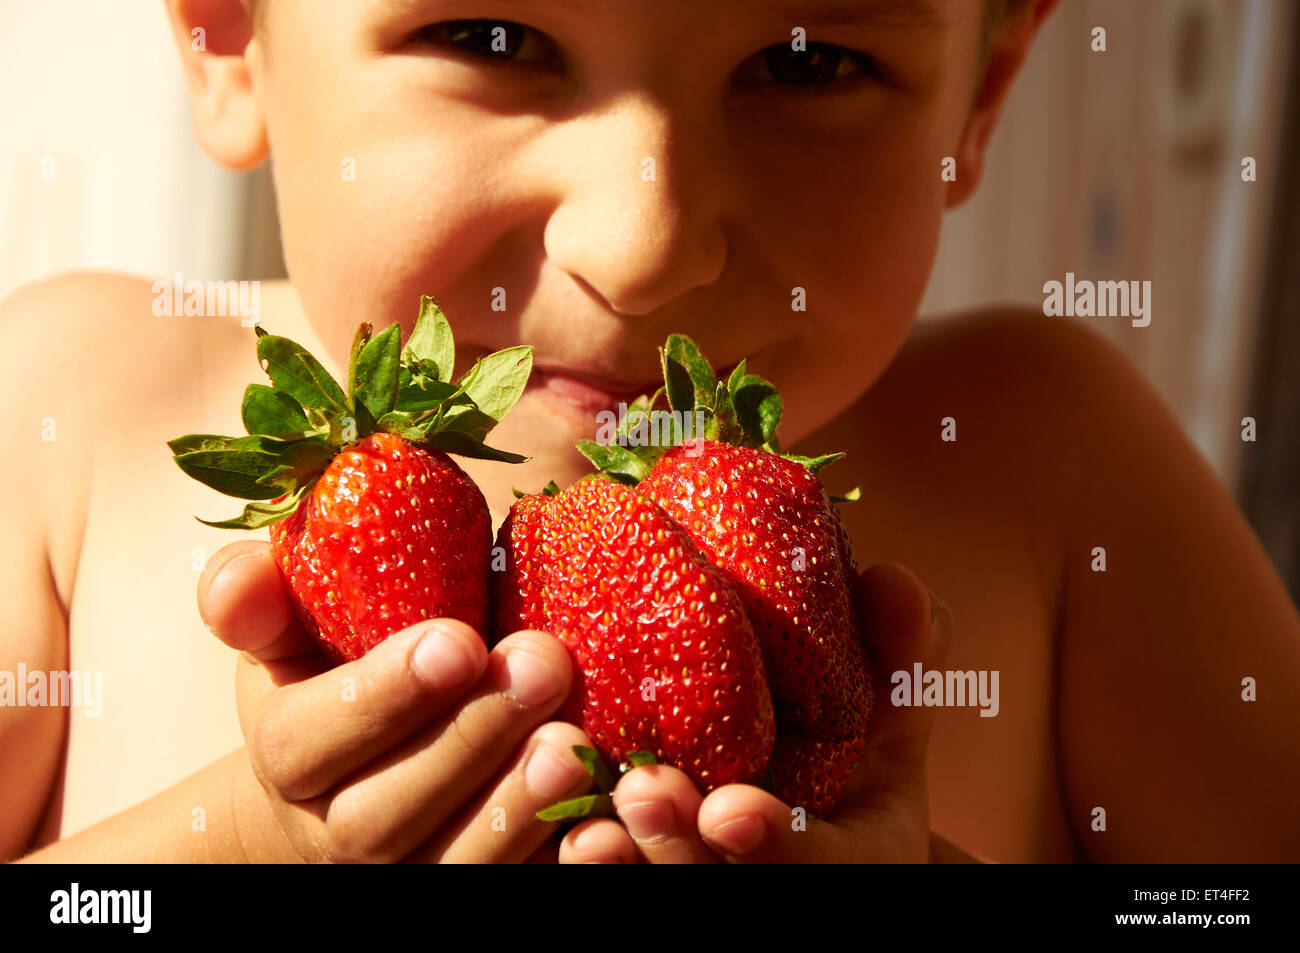 Several huge red ripe strawberries in boy's hands Stock Photo